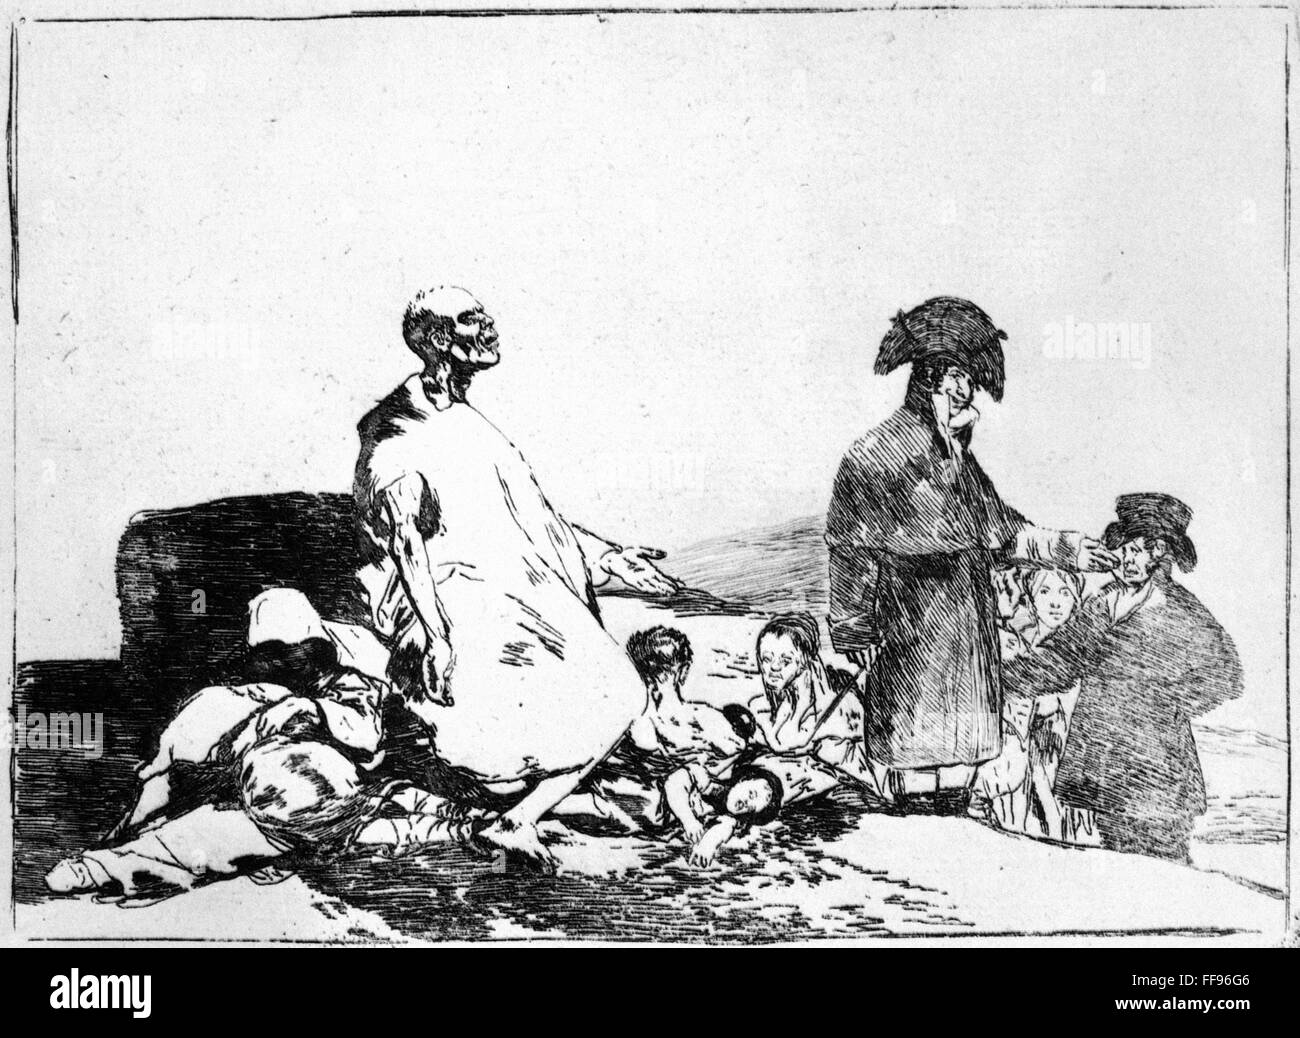 GOYA: DISASTERS OF WAR. /n'Si son de otro linage' (They are of Another Breed). Etching, lavis, drypoint and burin, plate 61 from Francisco Jose de Goya y Lucientes' 'Disasters of War,' 1810-14. Stock Photo